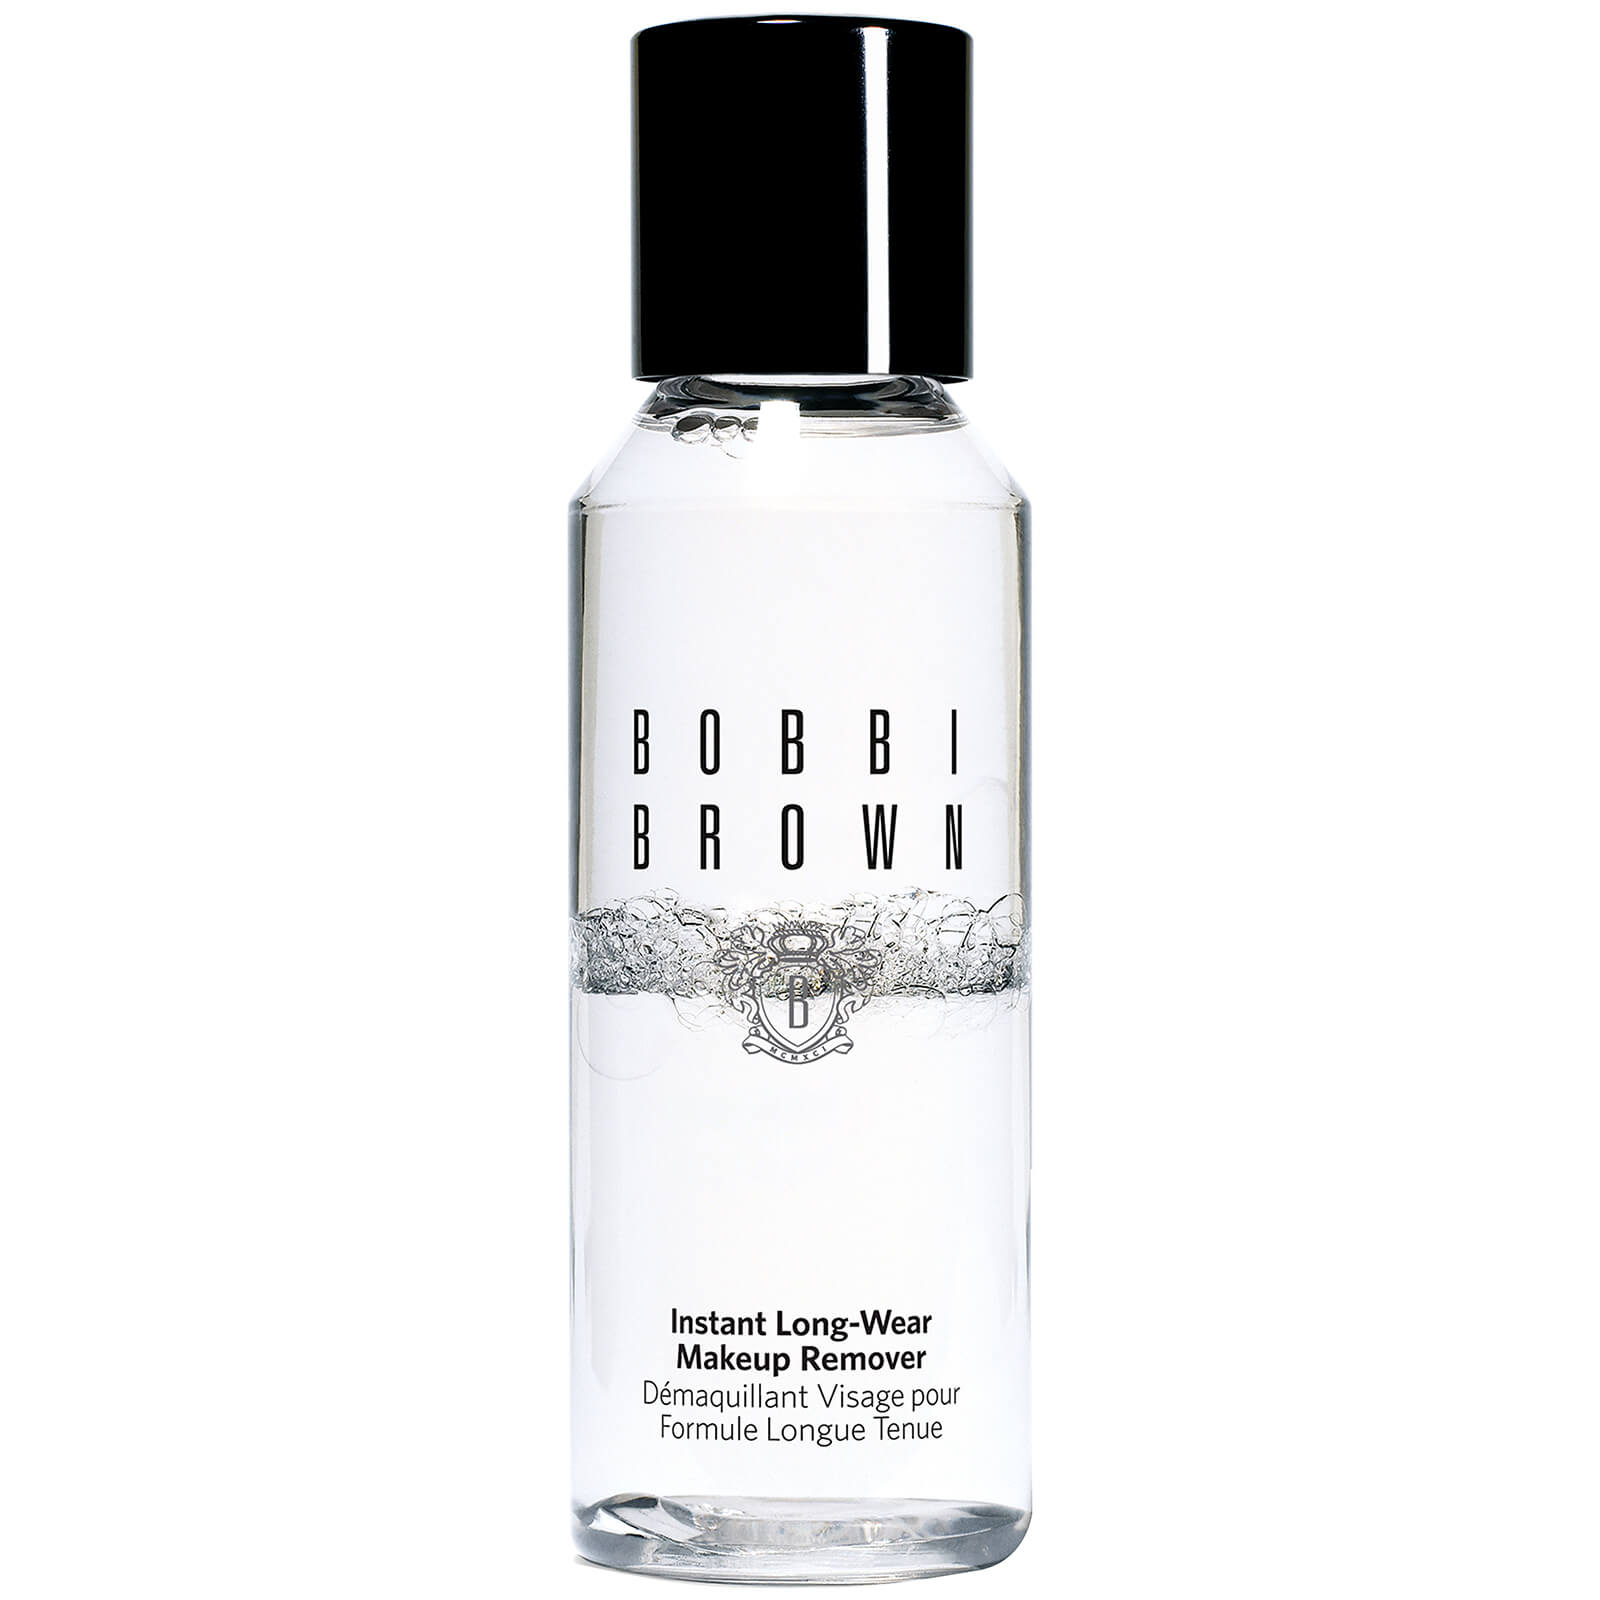 Photos - Facial / Body Cleansing Product Bobbi Brown Instant Long-Wear Makeup Remover 100ml E42G010000 